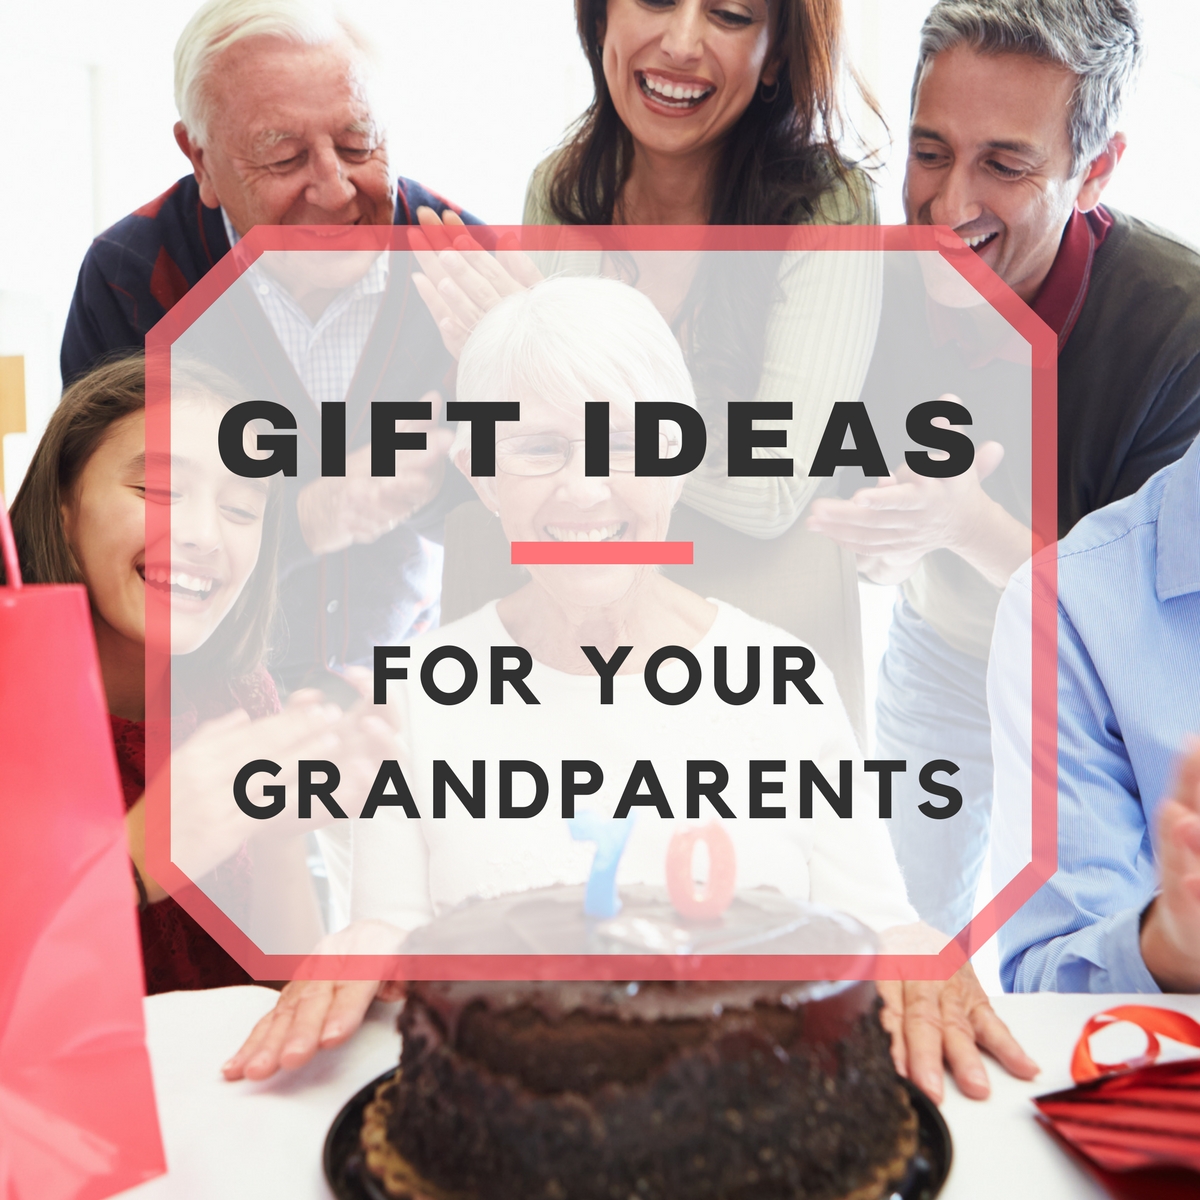 How to Buy a Thoughtful Gift for Grandparents, Gift Ideas for Grandparents